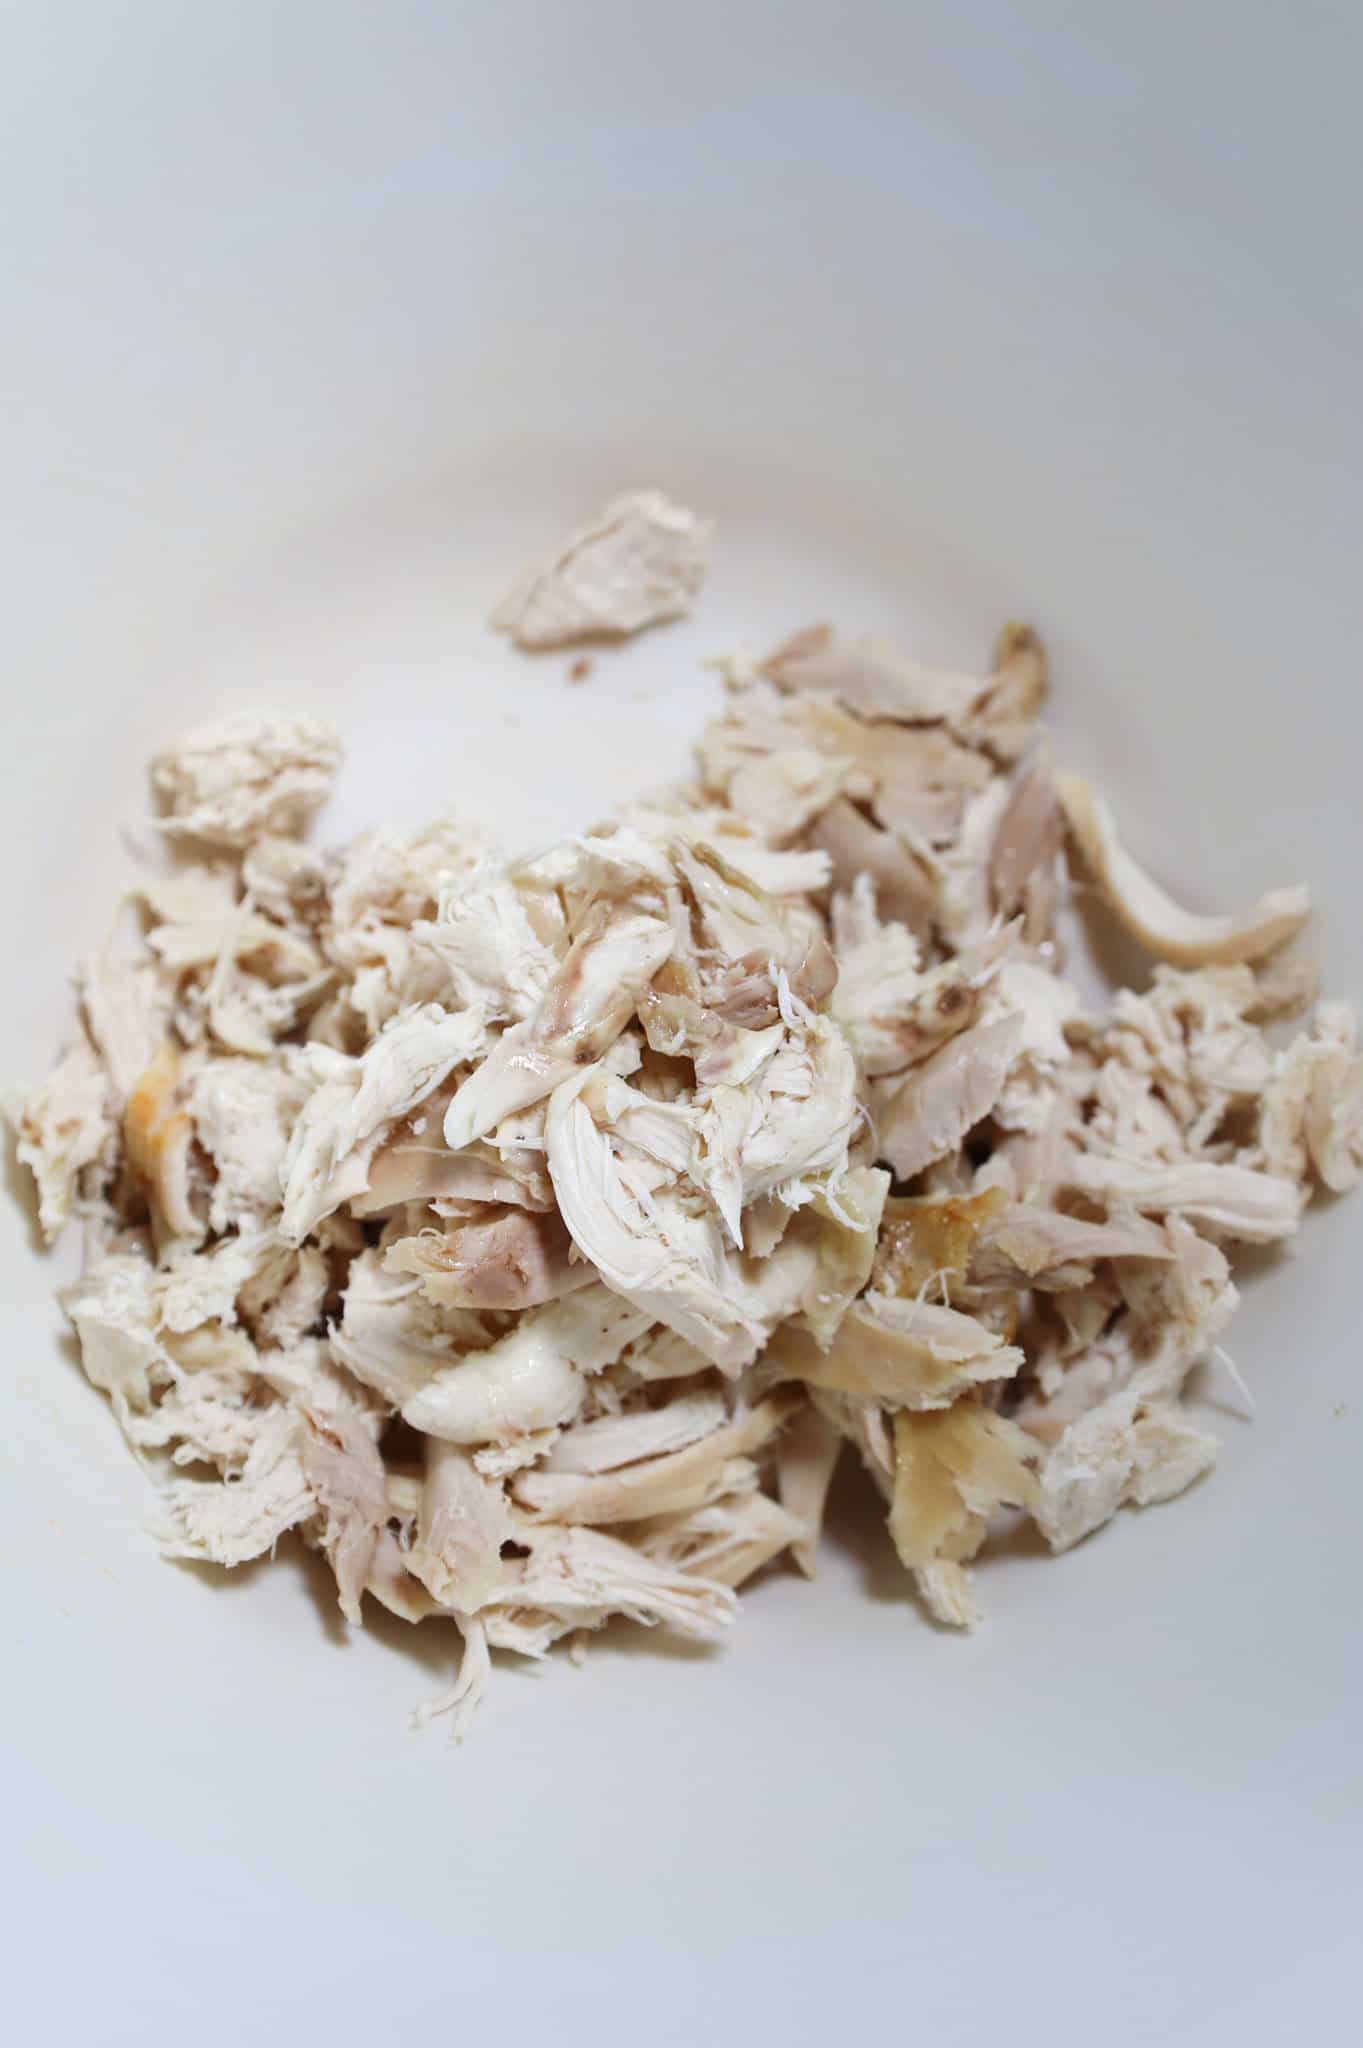 shredded rotisserie chicken in a mixing bowl